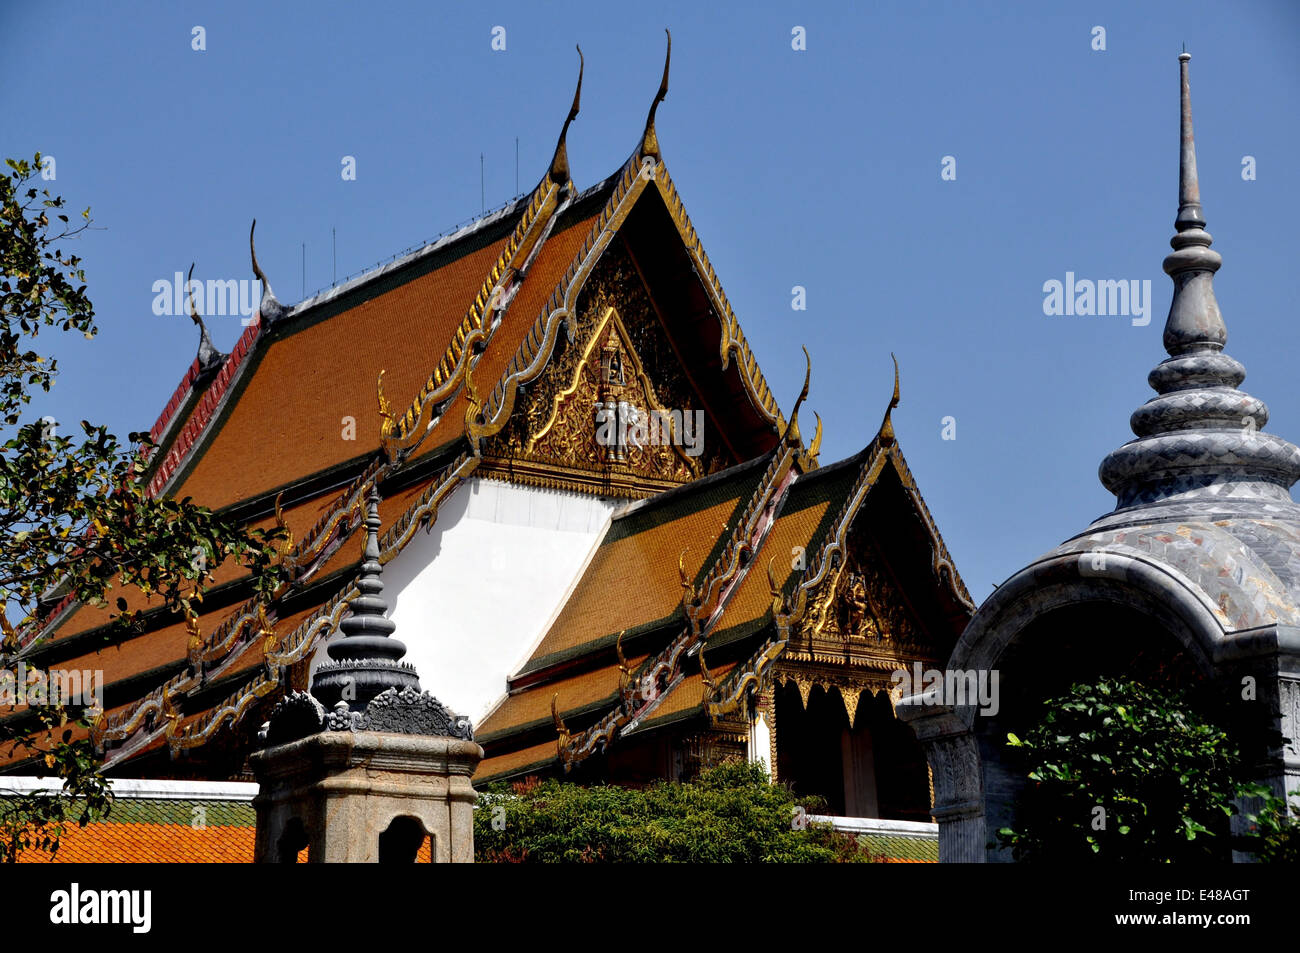 Bangkok, Thailand: Ubosot sanctuary hall with its gabled roofs, ornate tympanums, and chofah ornaments at Wat Suthat Stock Photo